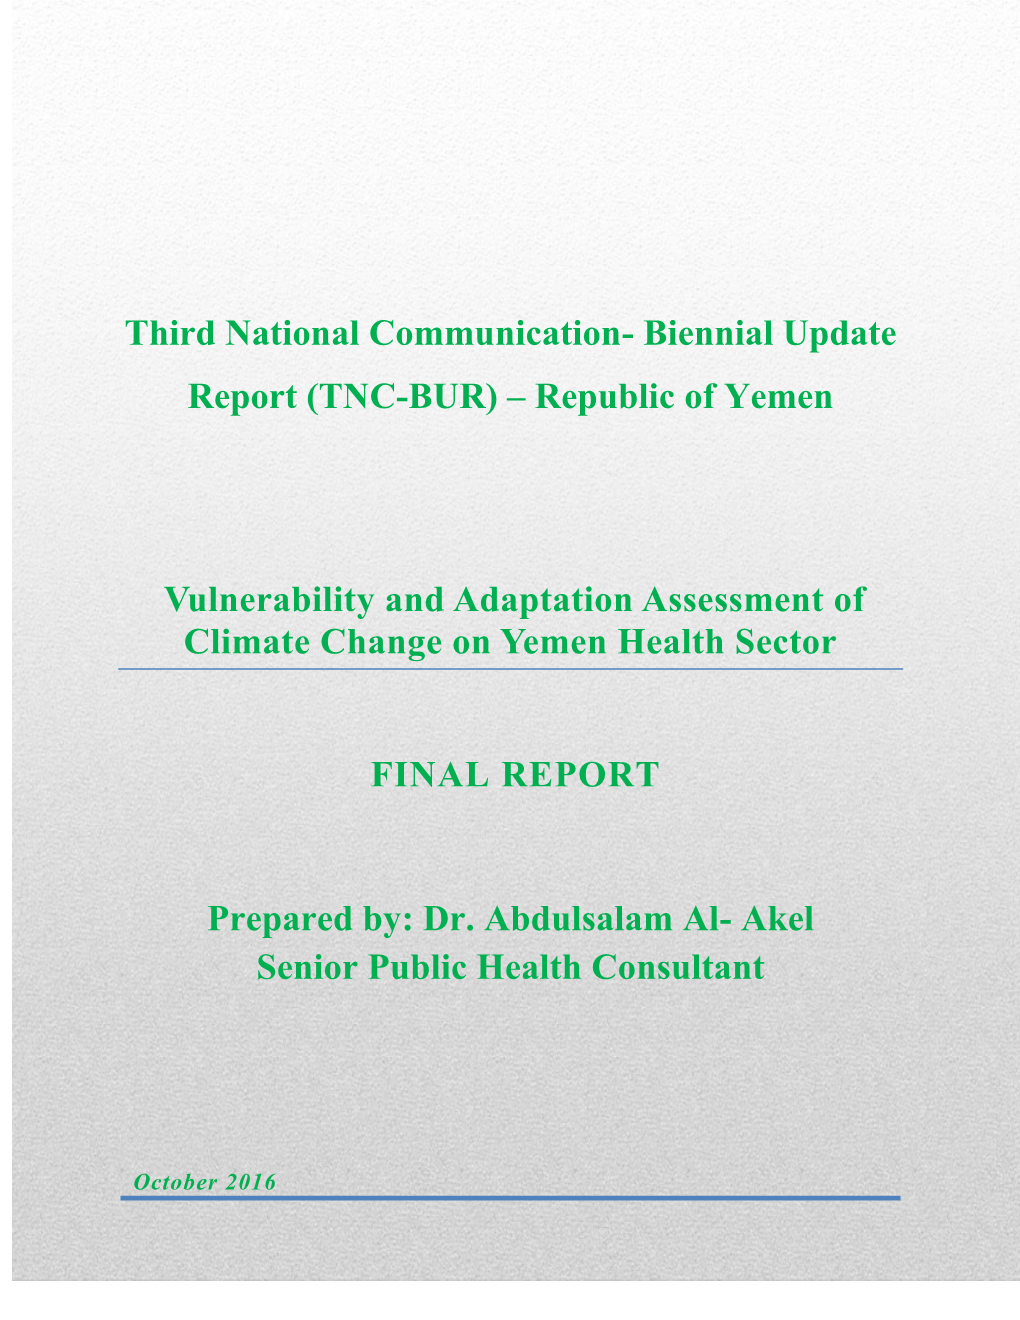 Vulnerability and Adaptation Assessment of Climate Change on Yemen Health Sector